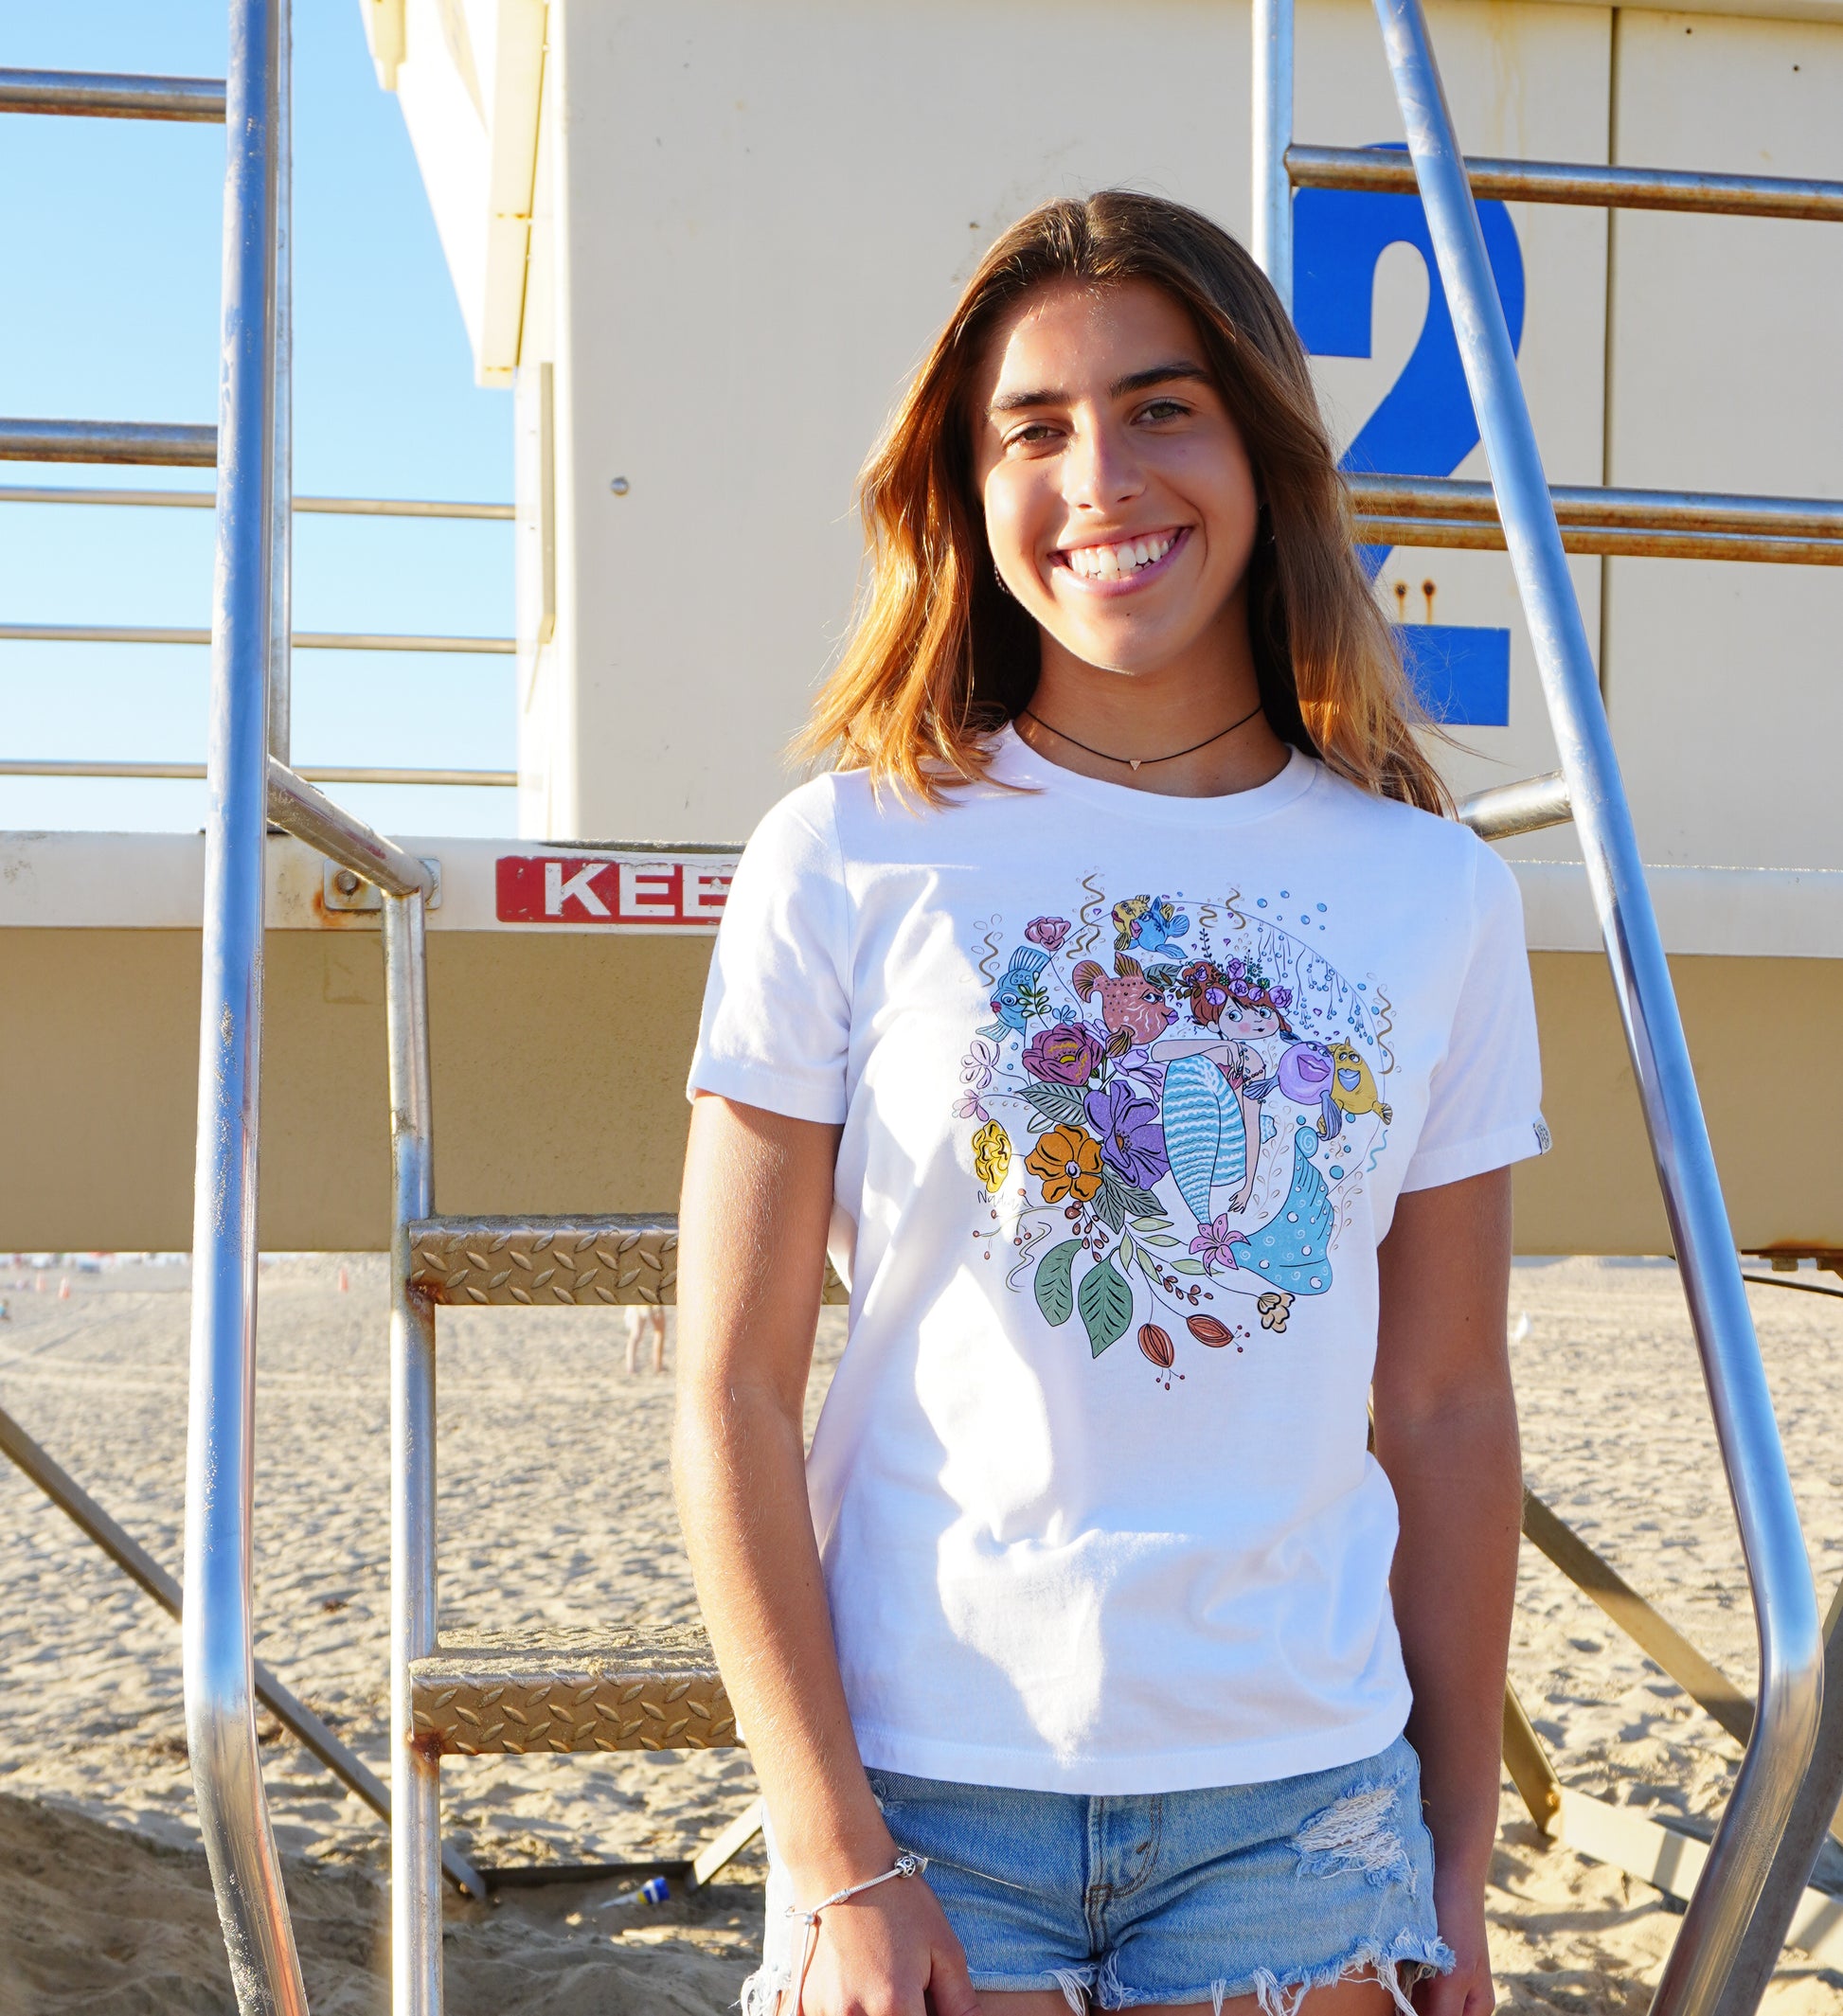 North Shore Girls graphic tee featuring a cute mermaid illustrated by a local artist Nadia Watts